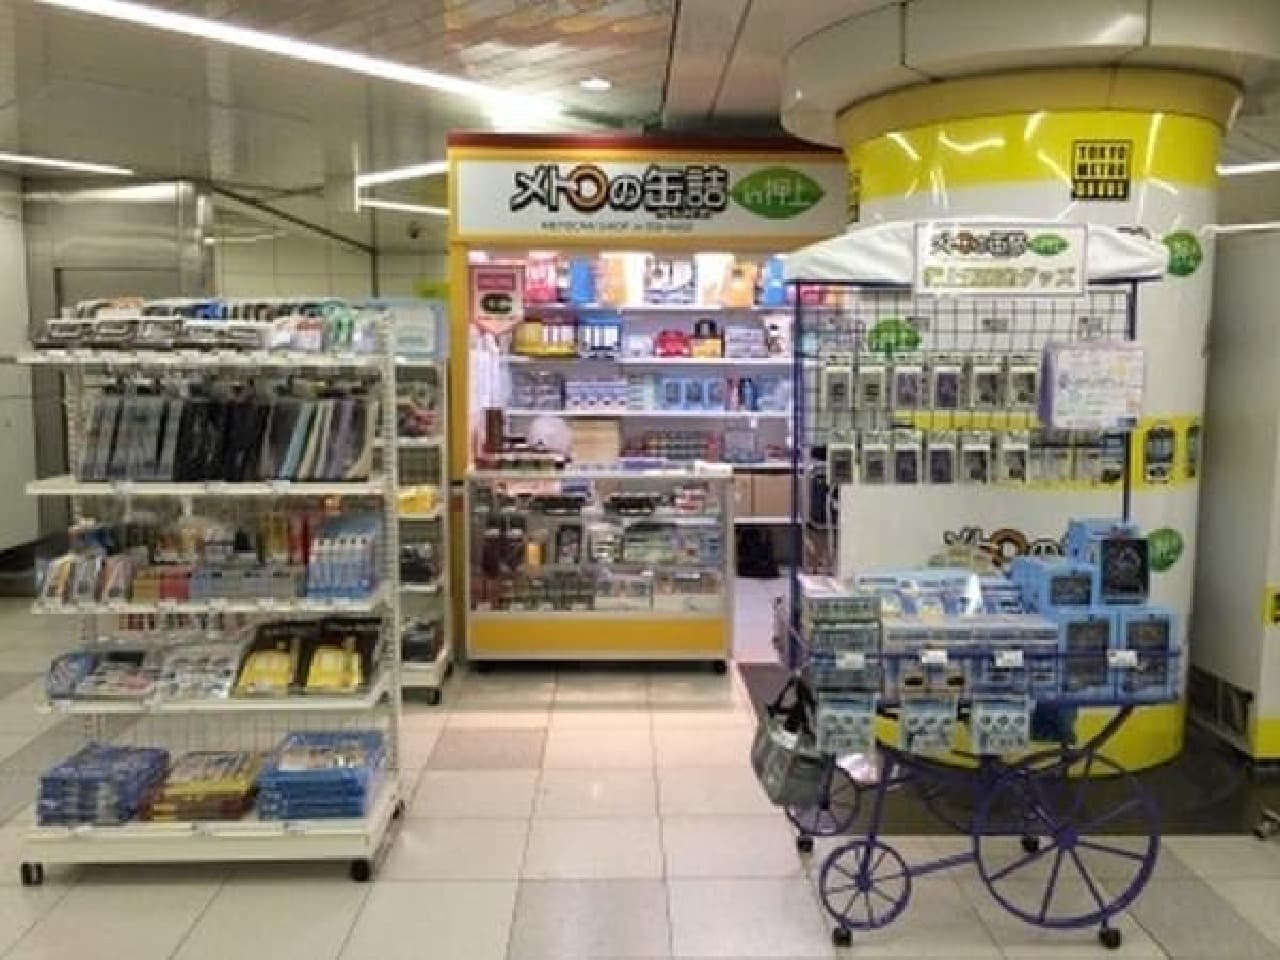 Goods shop "Canned Metro in Oshiage"